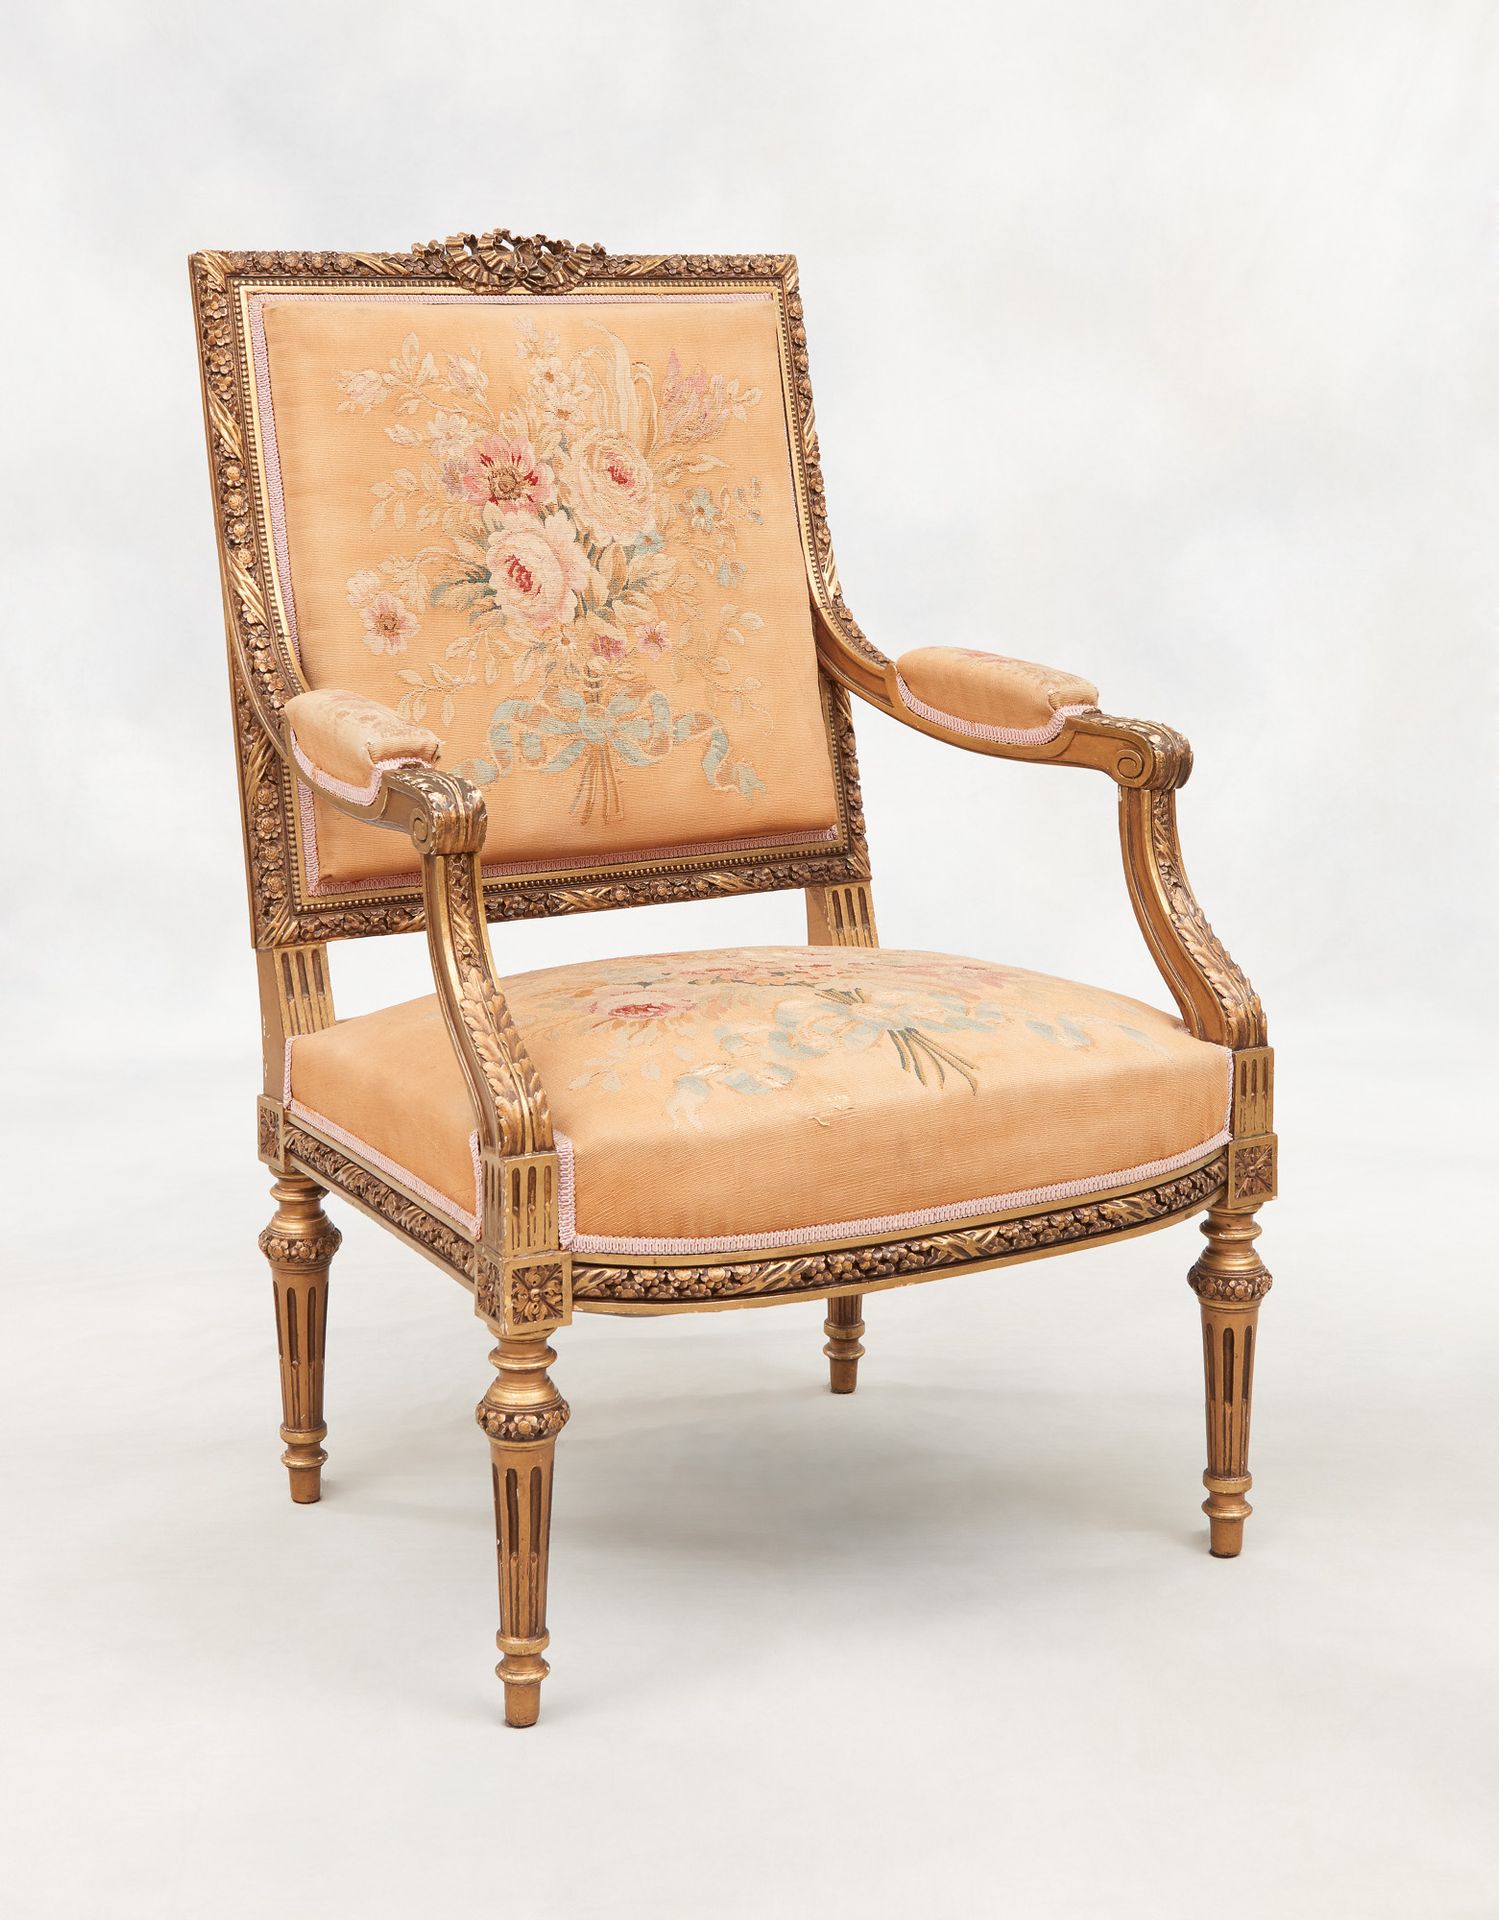 Travail Louis XVI. Furniture: Suite of five armchairs with gilded carved wood ar&hellip;